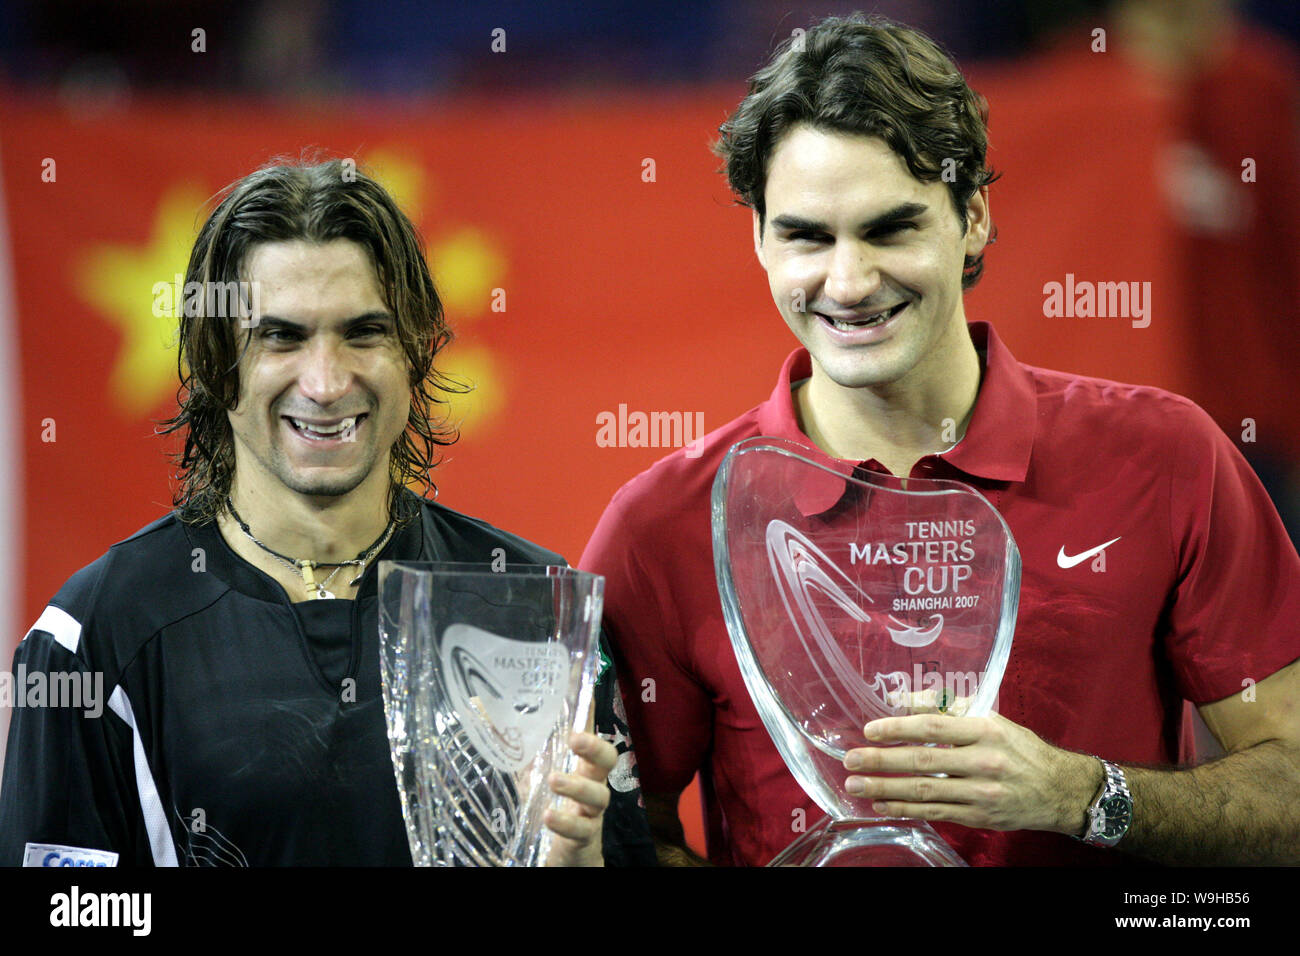 Roger Federer of Switzerland (right), champion, and David Ferrer of Spain,  first runner-up, hold up their trophies during the final of the Tennis Mast  Stock Photo - Alamy